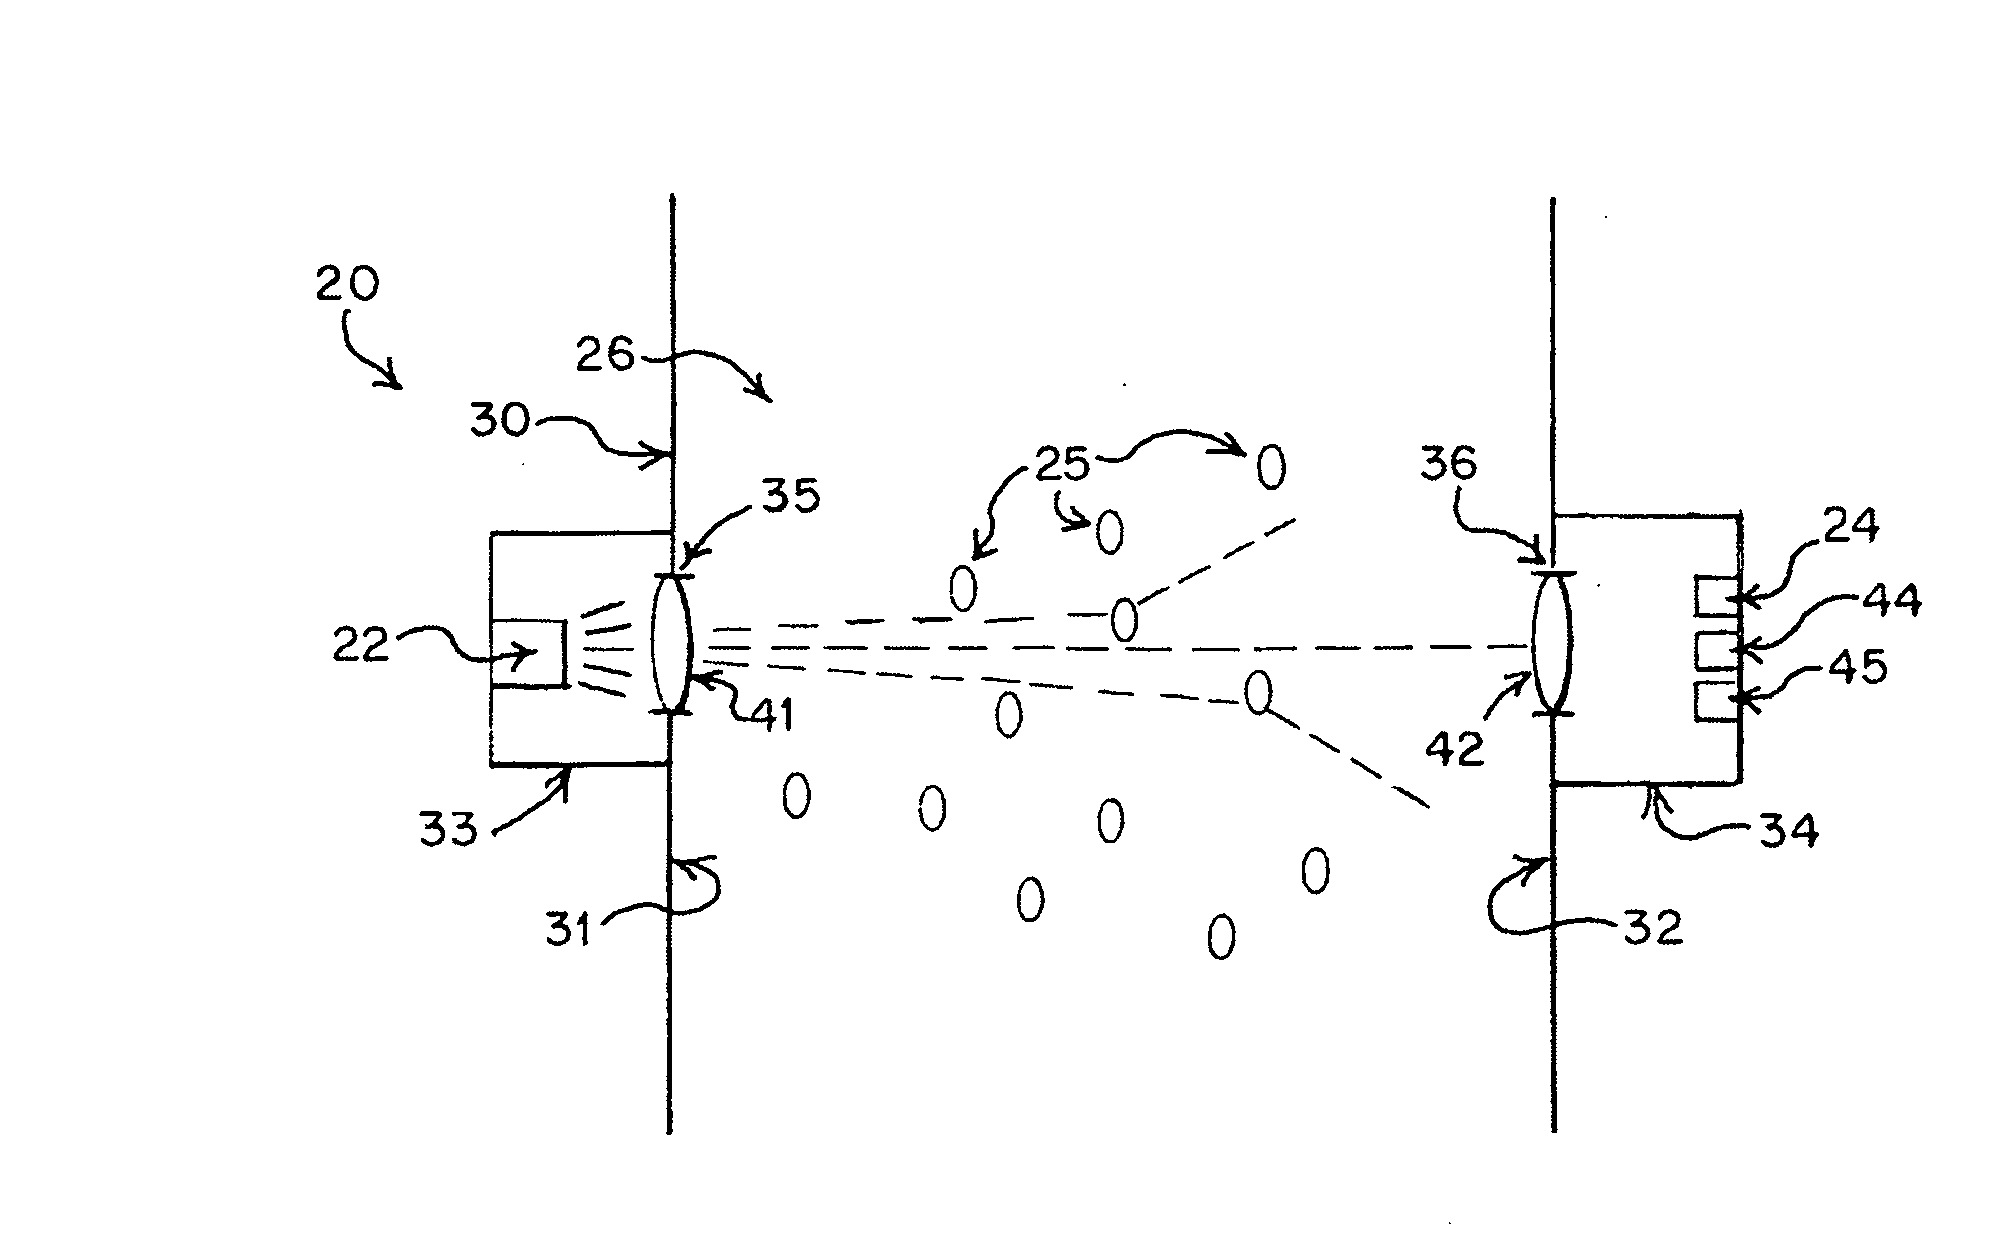 Apparatus, system and method for using an LED to identify a presence of a material in a gas and/or a fluid and/or determine properties of the material